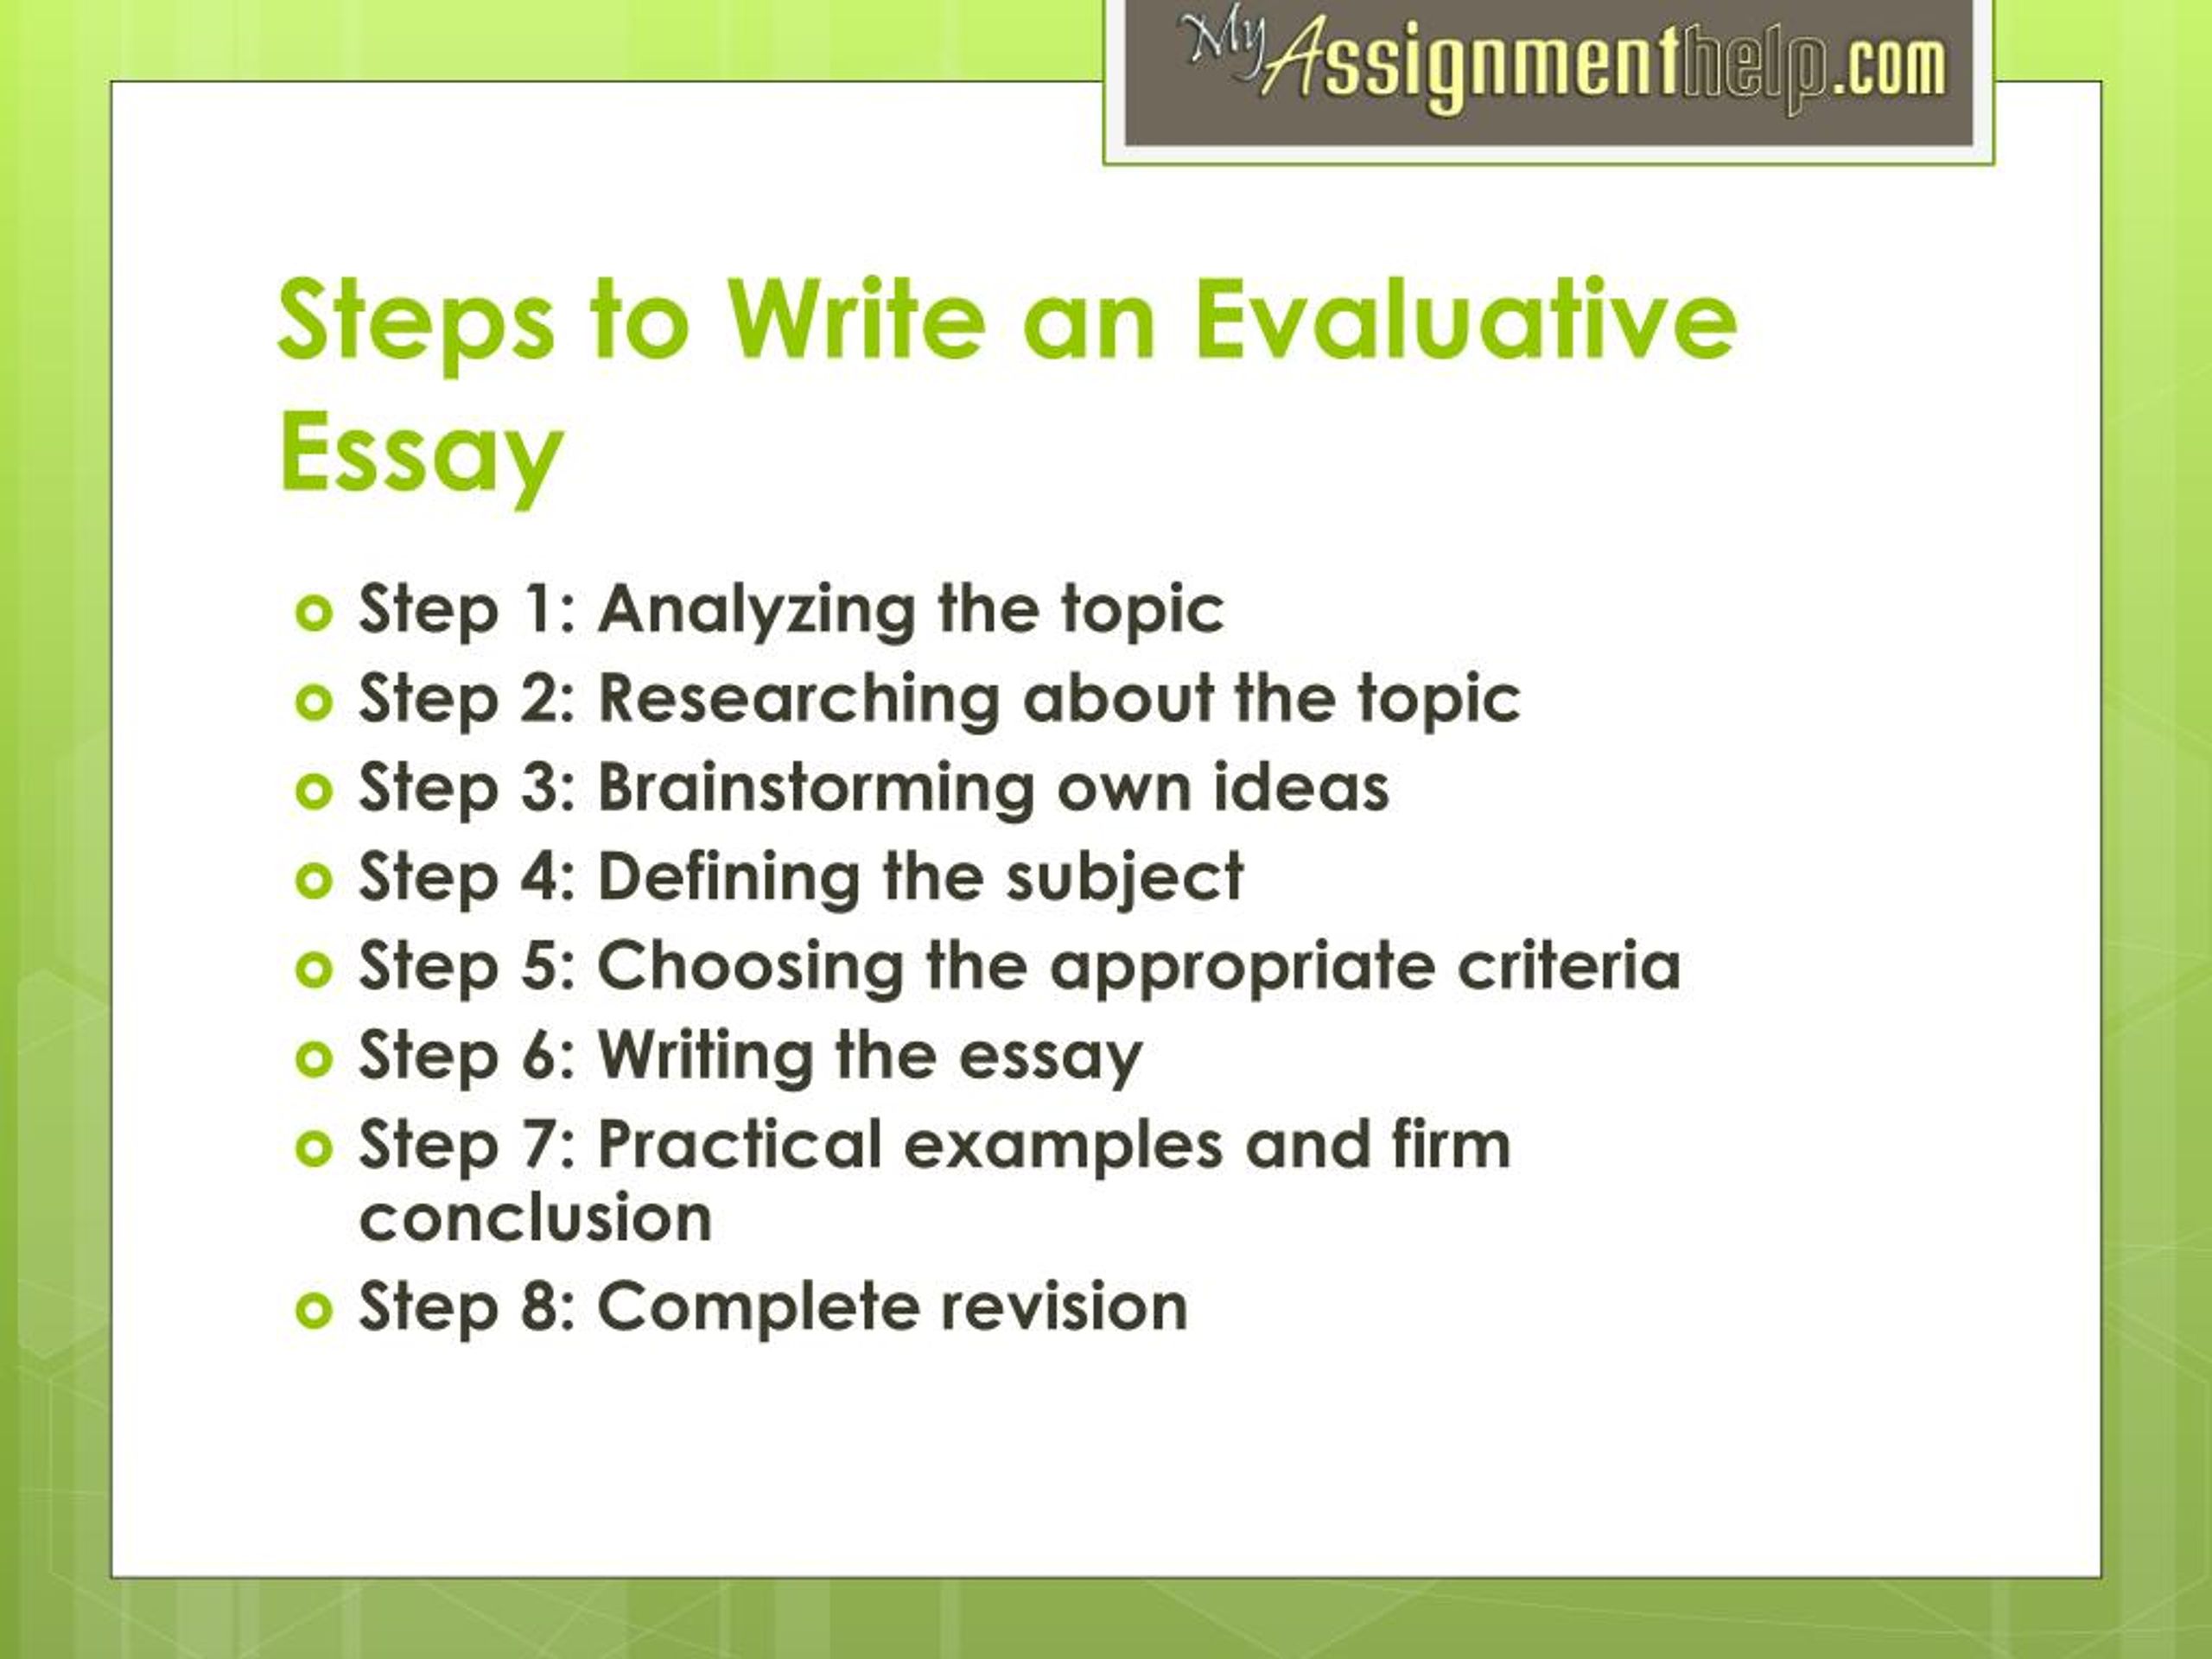 research designs writing assignment (evaluative)